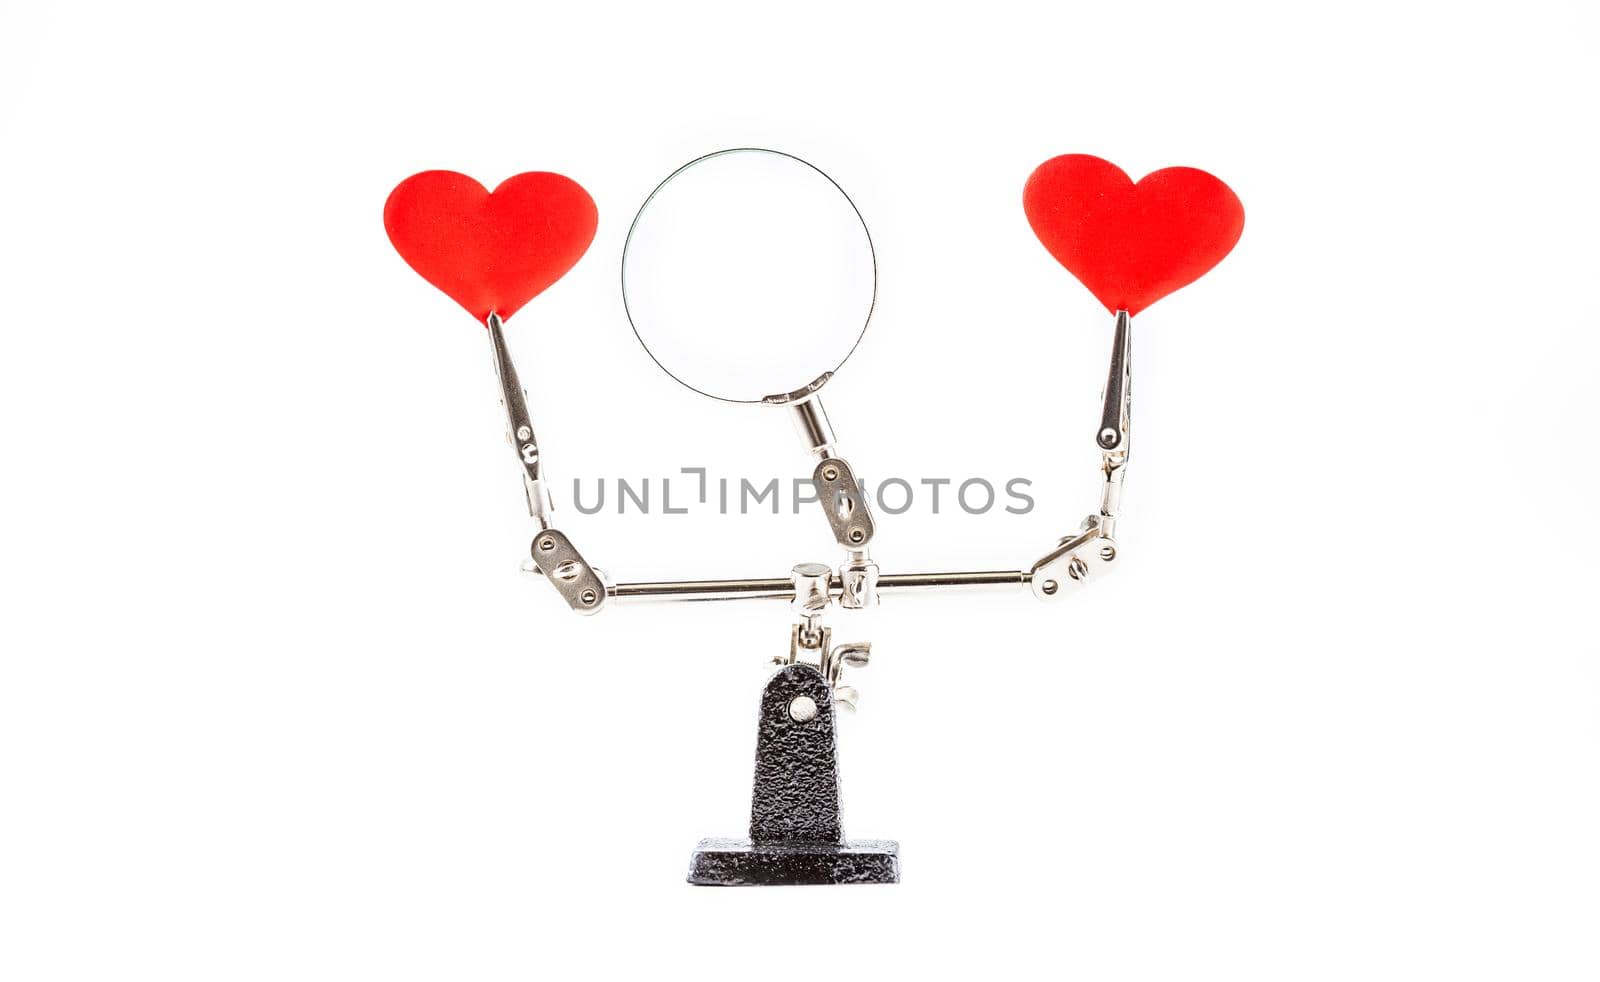 Valentines Day background with tool third hand holding hearts on white by galinasharapova